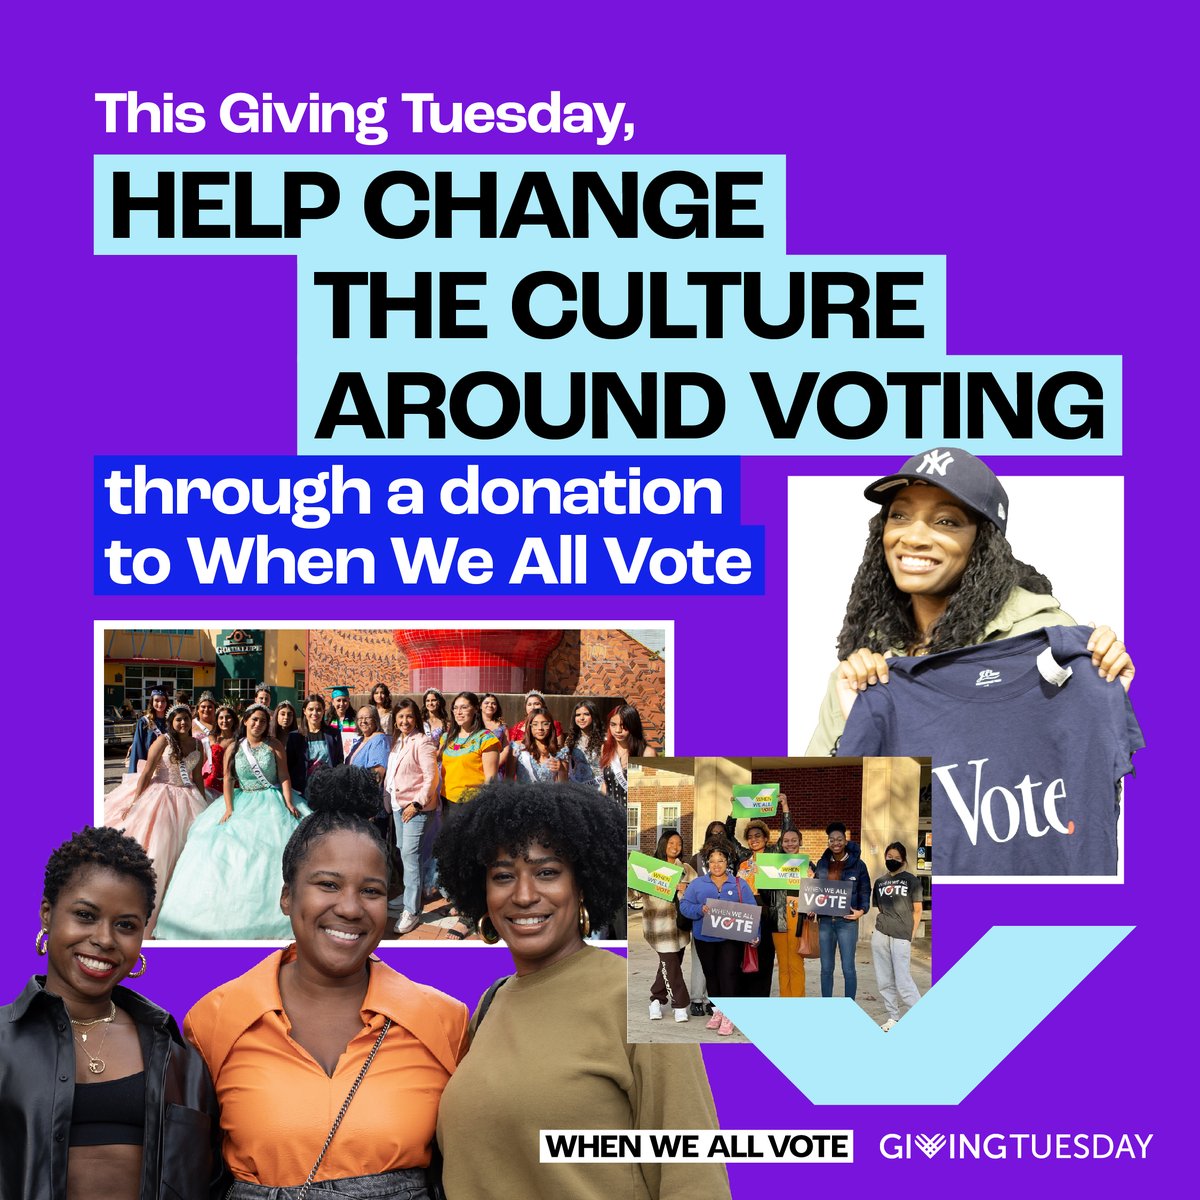 From day ONE, our mission has been to change the culture around voting — so we’ve brought voting to: 📺 TV shows 🎶 Music festivals 🎟️ Cultural events 📱 Social media feeds 🎉 Parties at the Polls Support our work with a #GivingTuesday gift at weall.vote/givingtuesday!